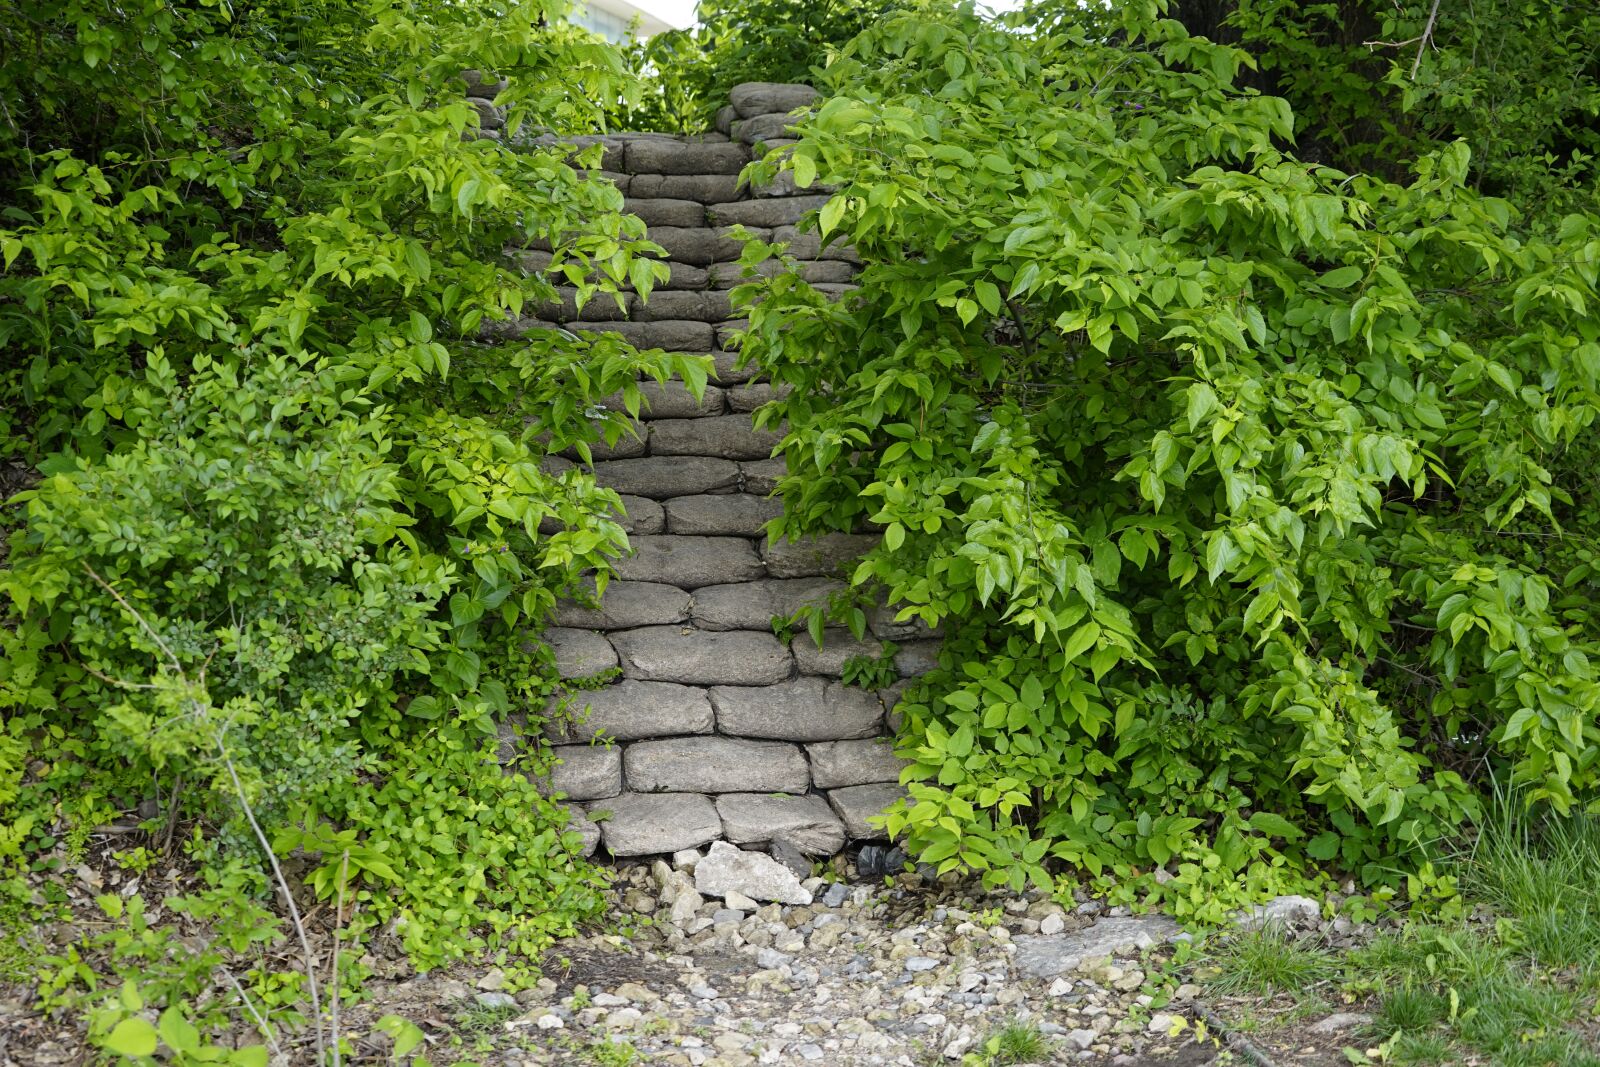 Sony a7 sample photo. Stairs, rock, leaves photography